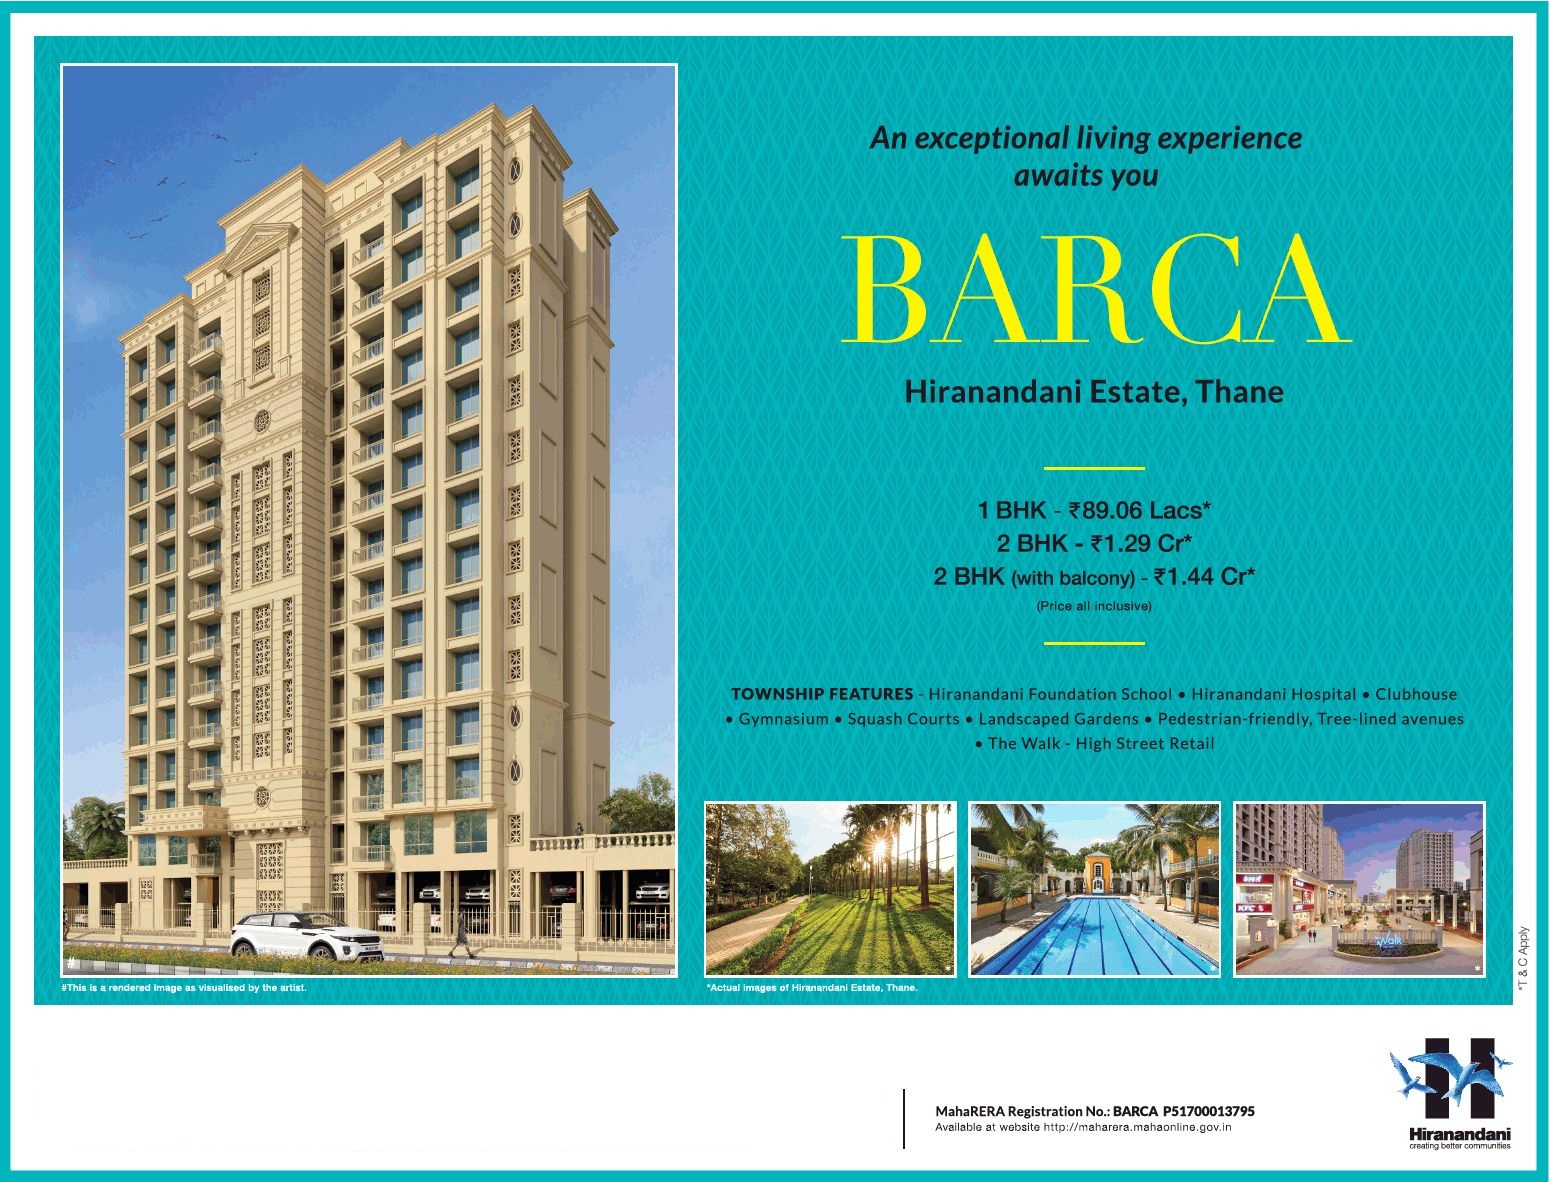 Exceptional Living Experience Awaits You at Hiranandani Estate BARCA, Thane Update